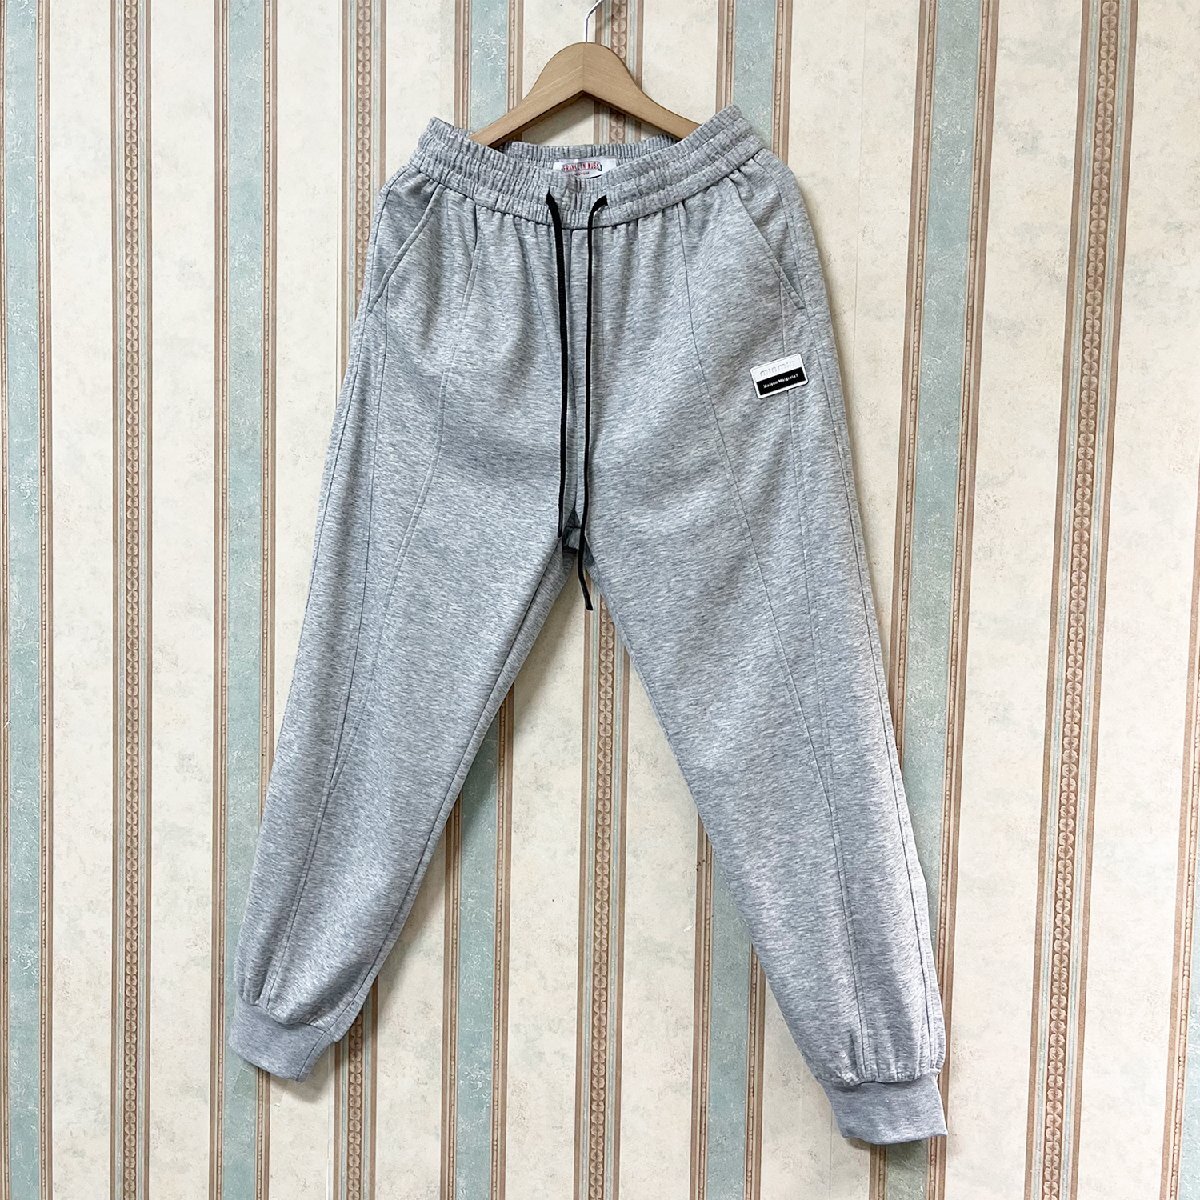  standard regular price 5 ten thousand FRANKLIN MUSK* America * New York departure sweat pants comfortable soft easy trousers chinos bottoms sport size 3